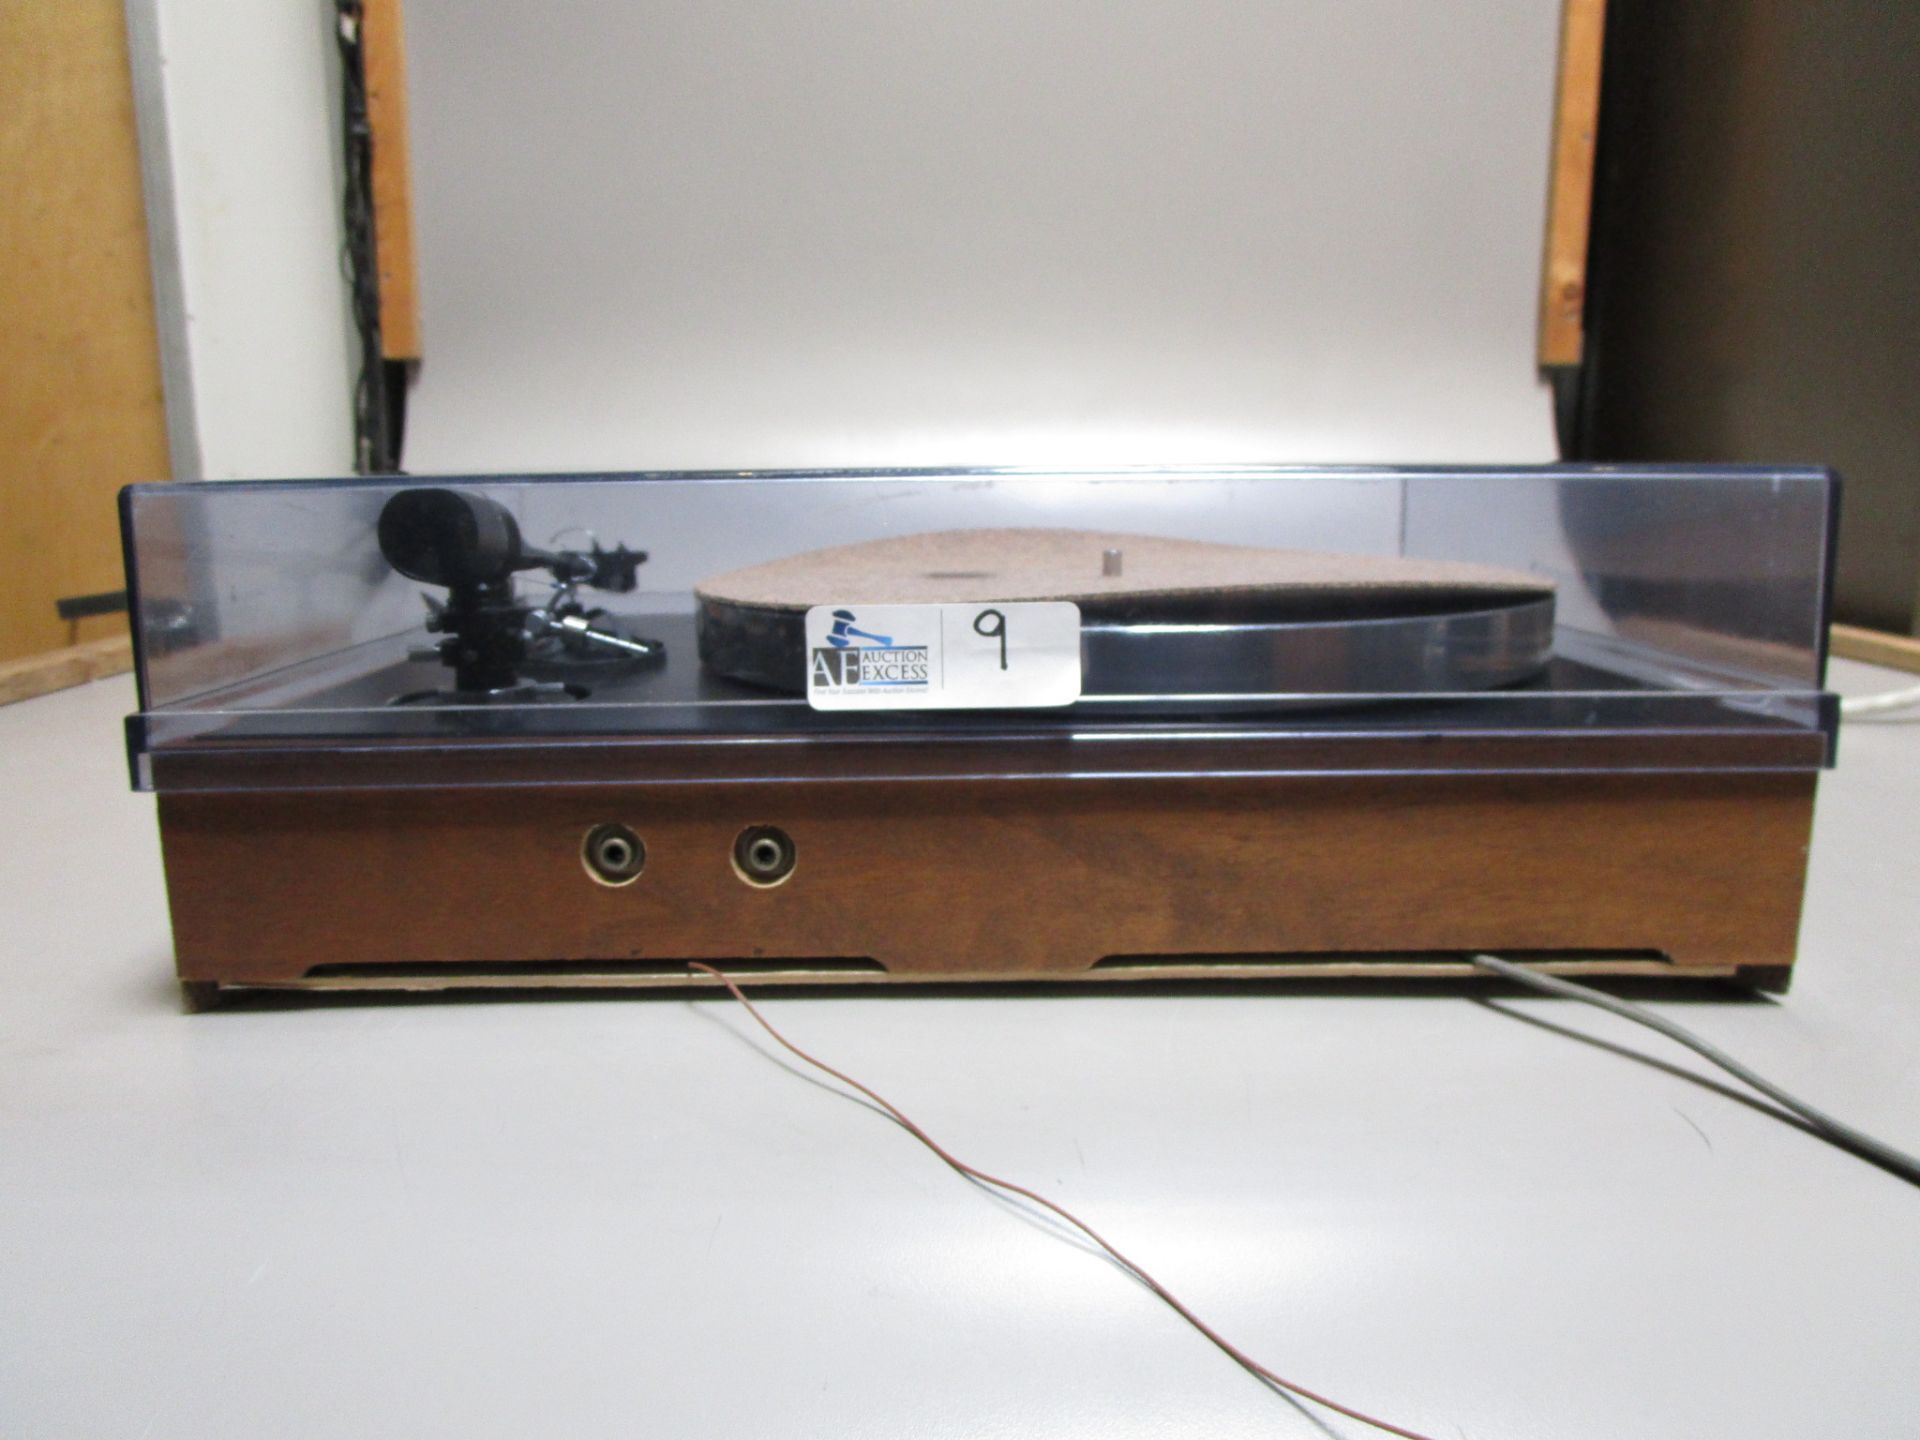 AR TURNTABLE - Image 4 of 4